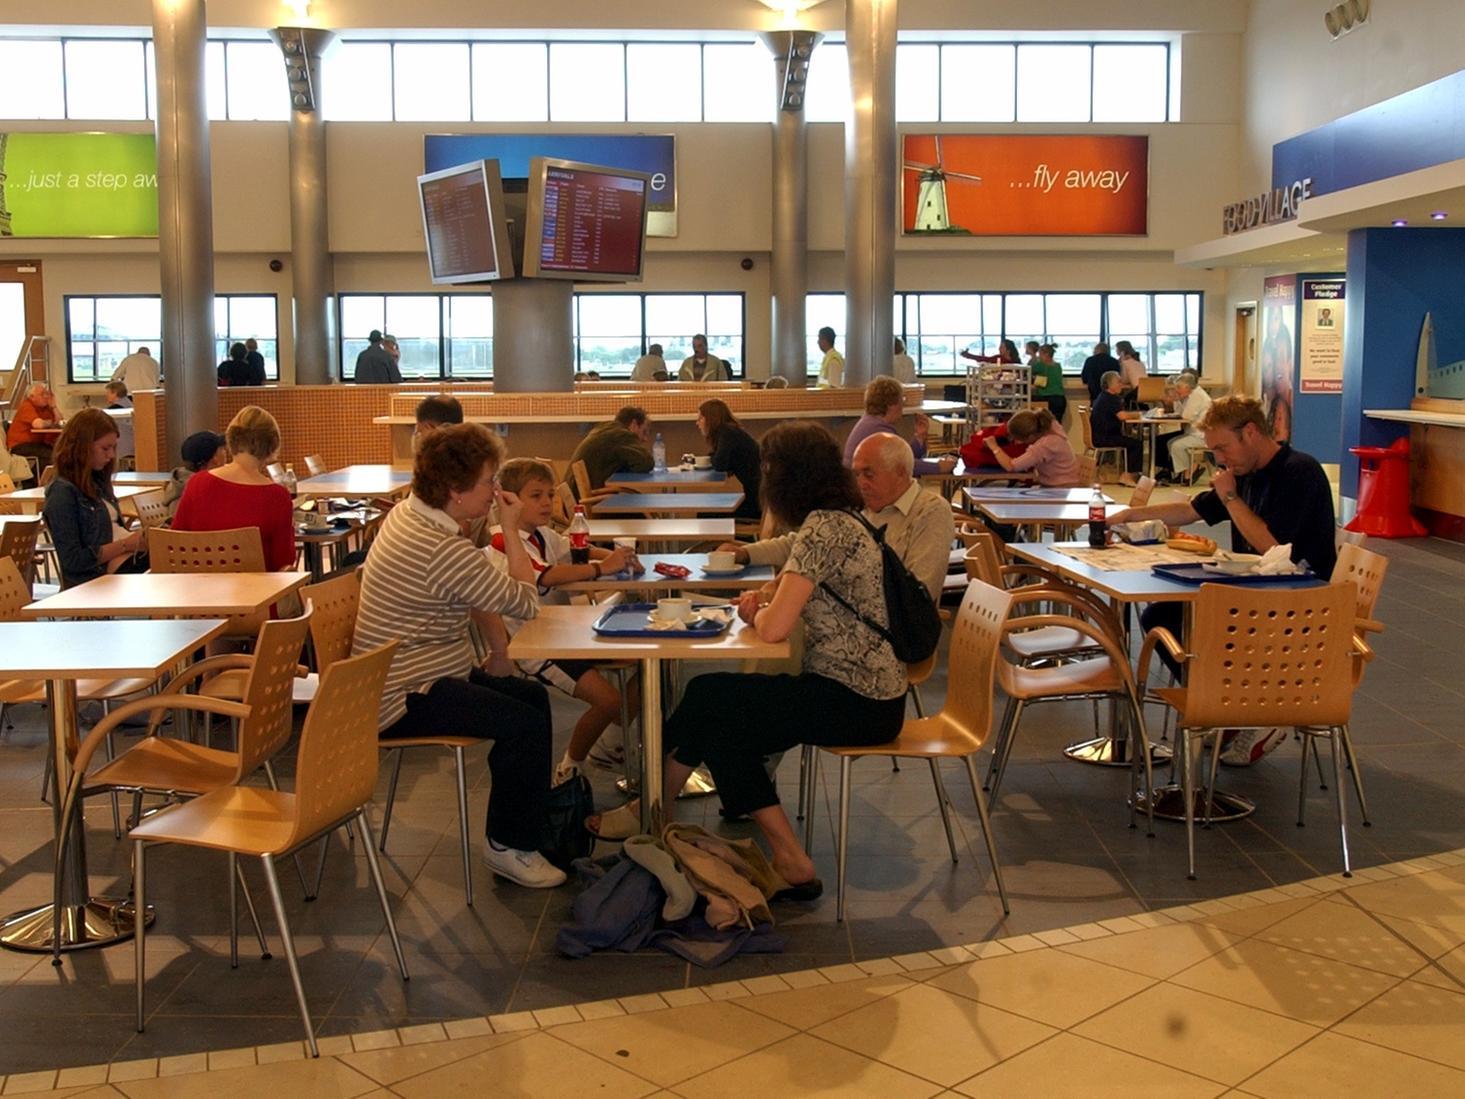 The new food village in the terminal building.